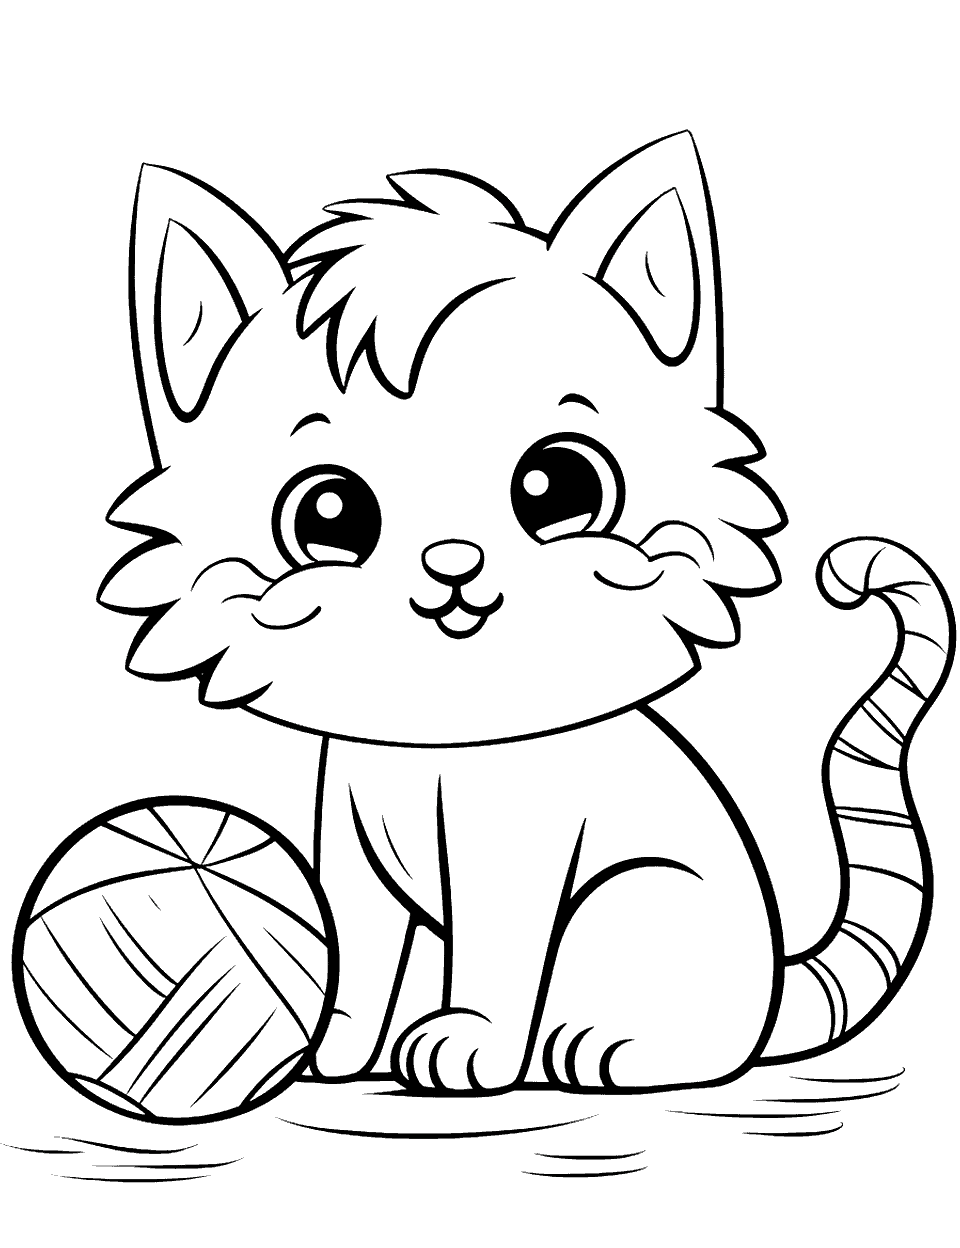 Cute Kitten Playing Coloring Page - A fluffy kitten playing with a ball of yarn.